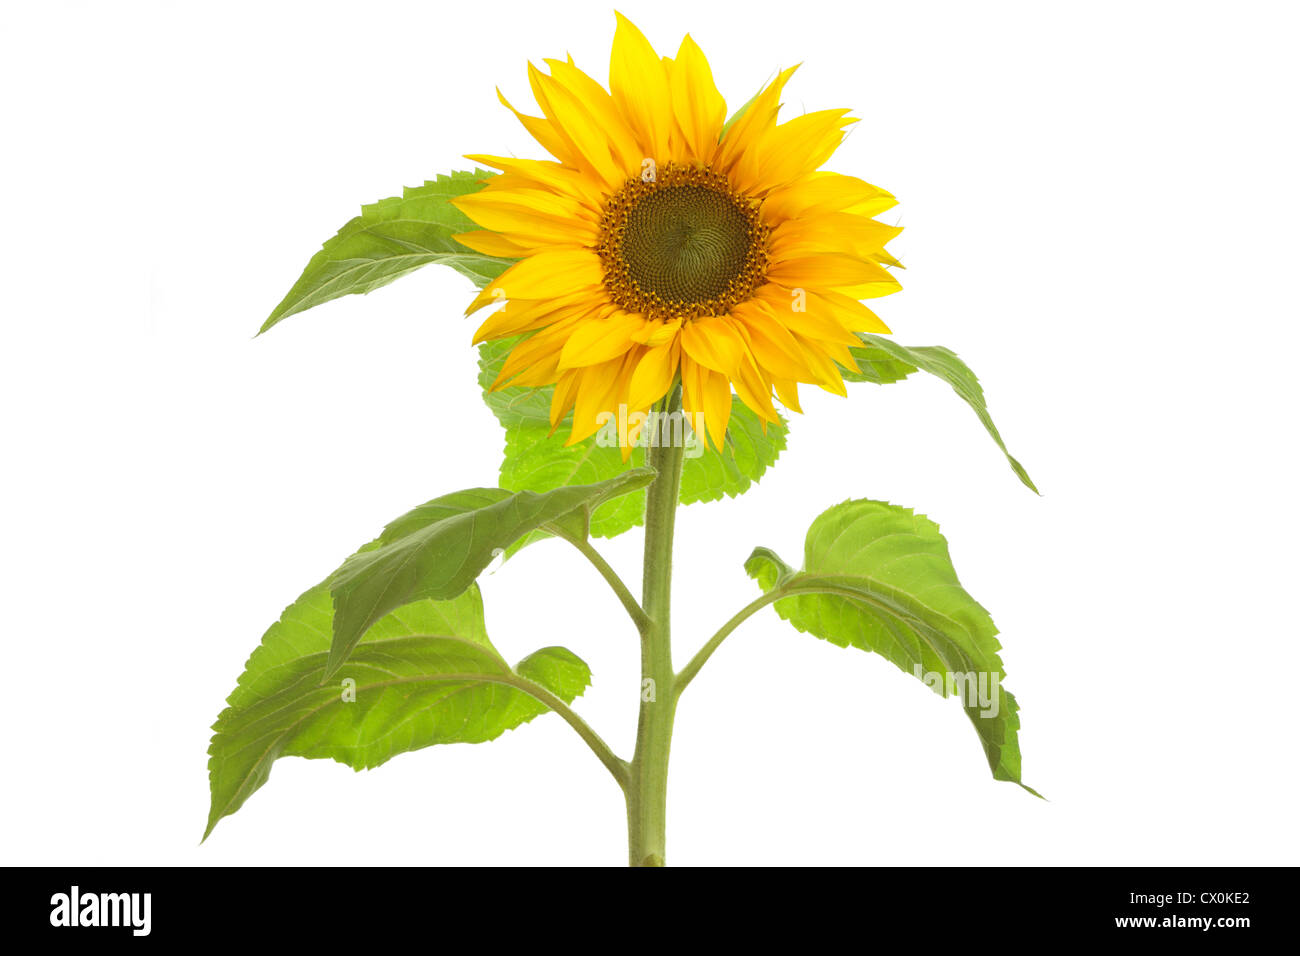 Close up of front of sunflower (Helianthus annuus) on white background Stock Photo